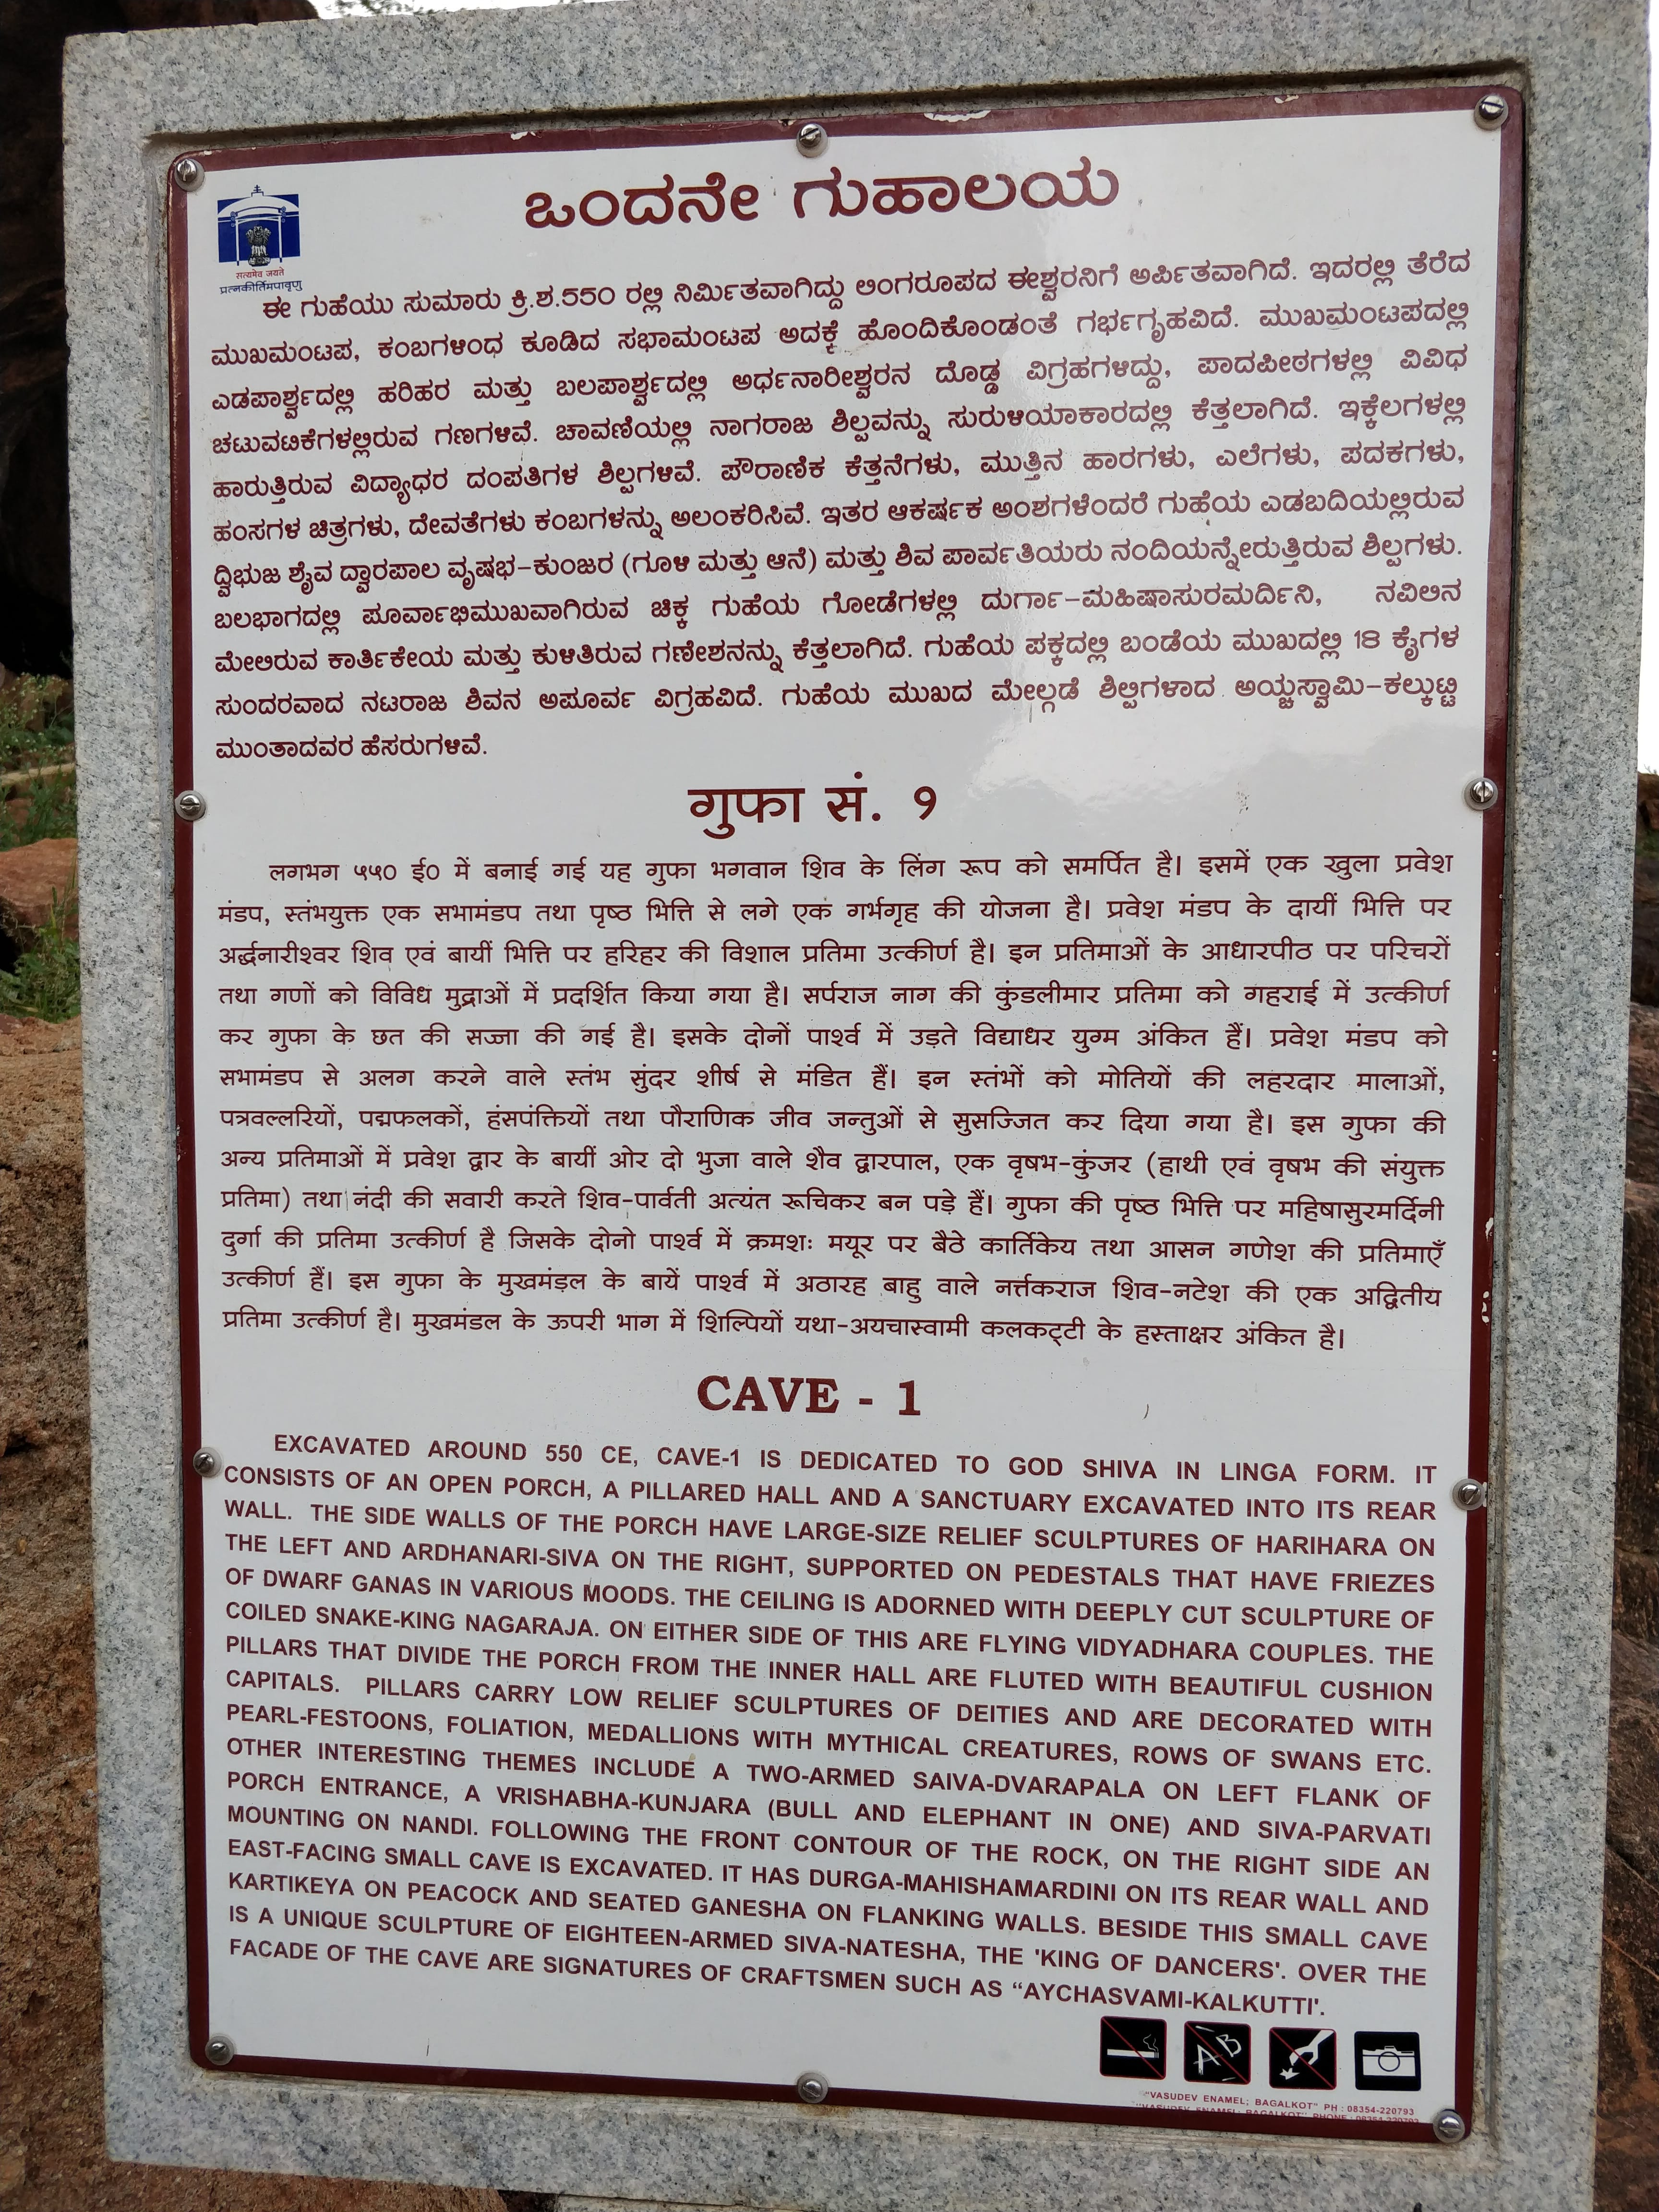 info board - First cave temple